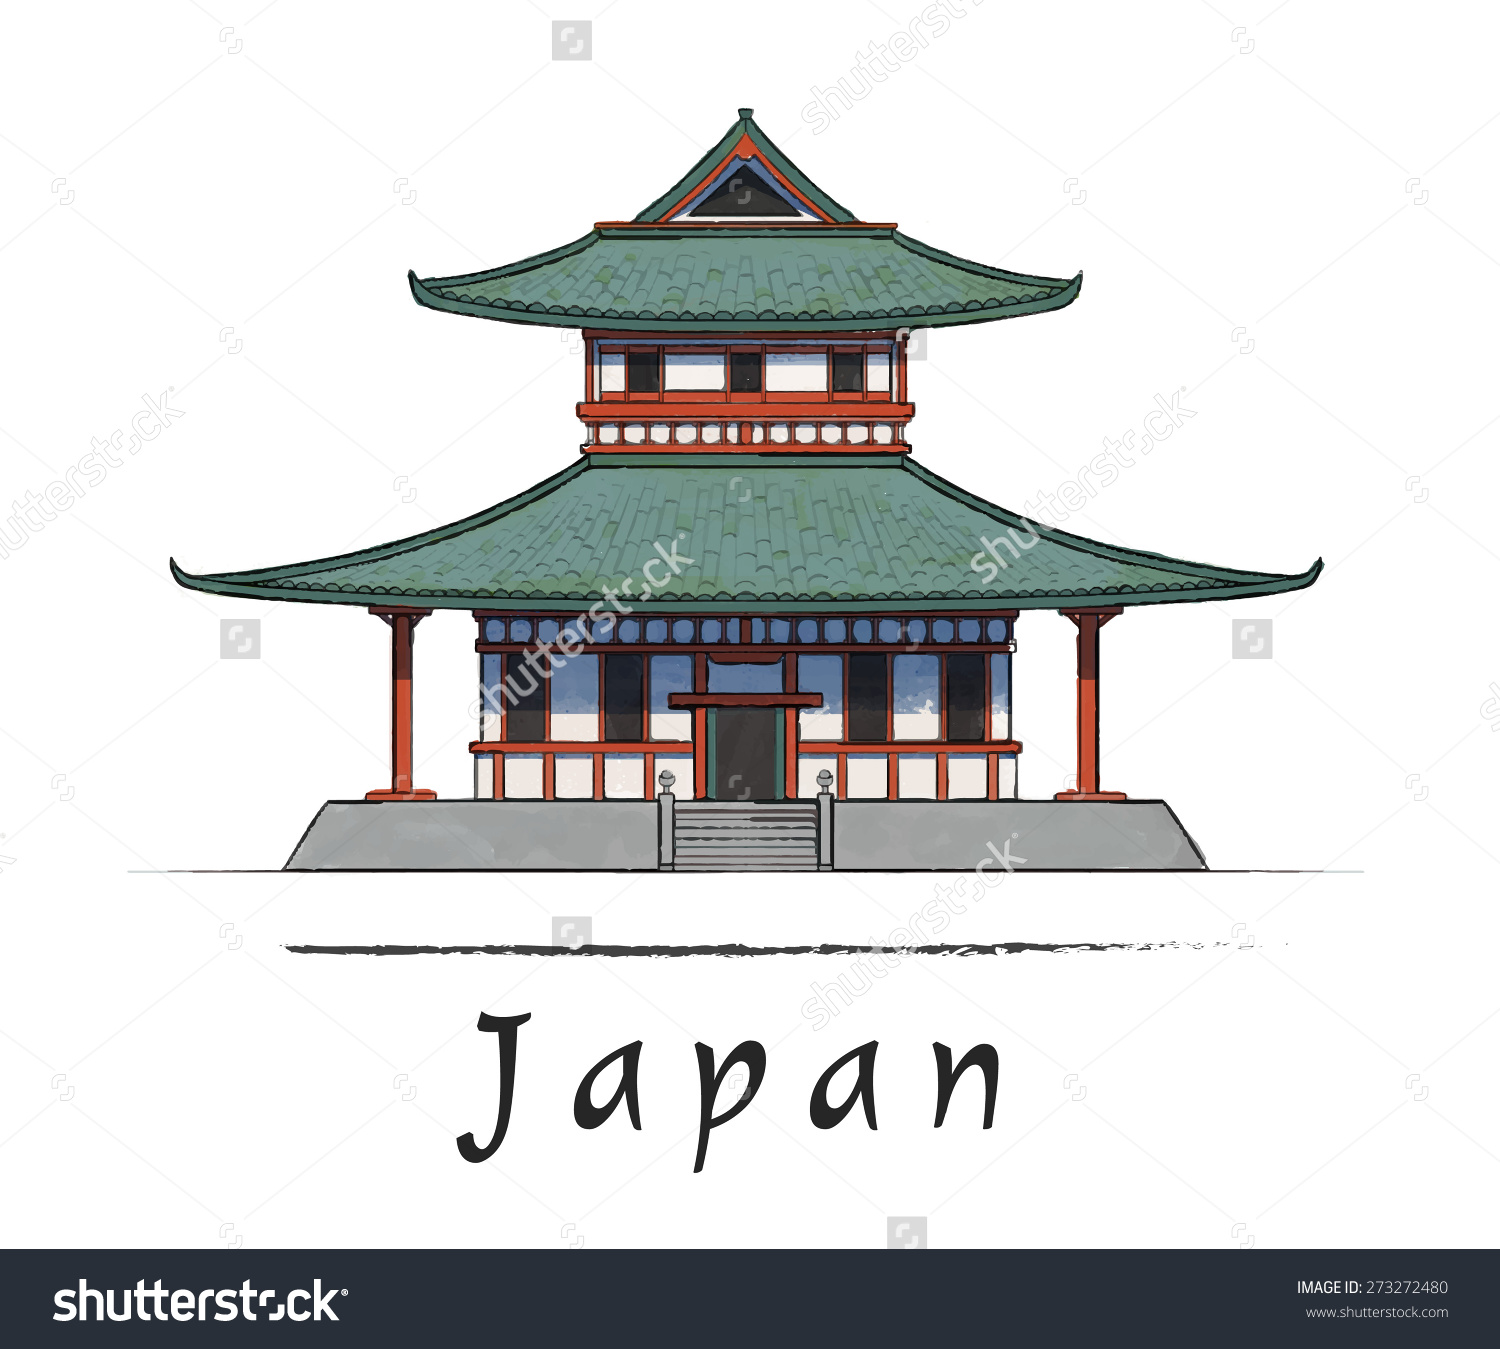 How To Draw A Japanese House Step By Step - House Spots